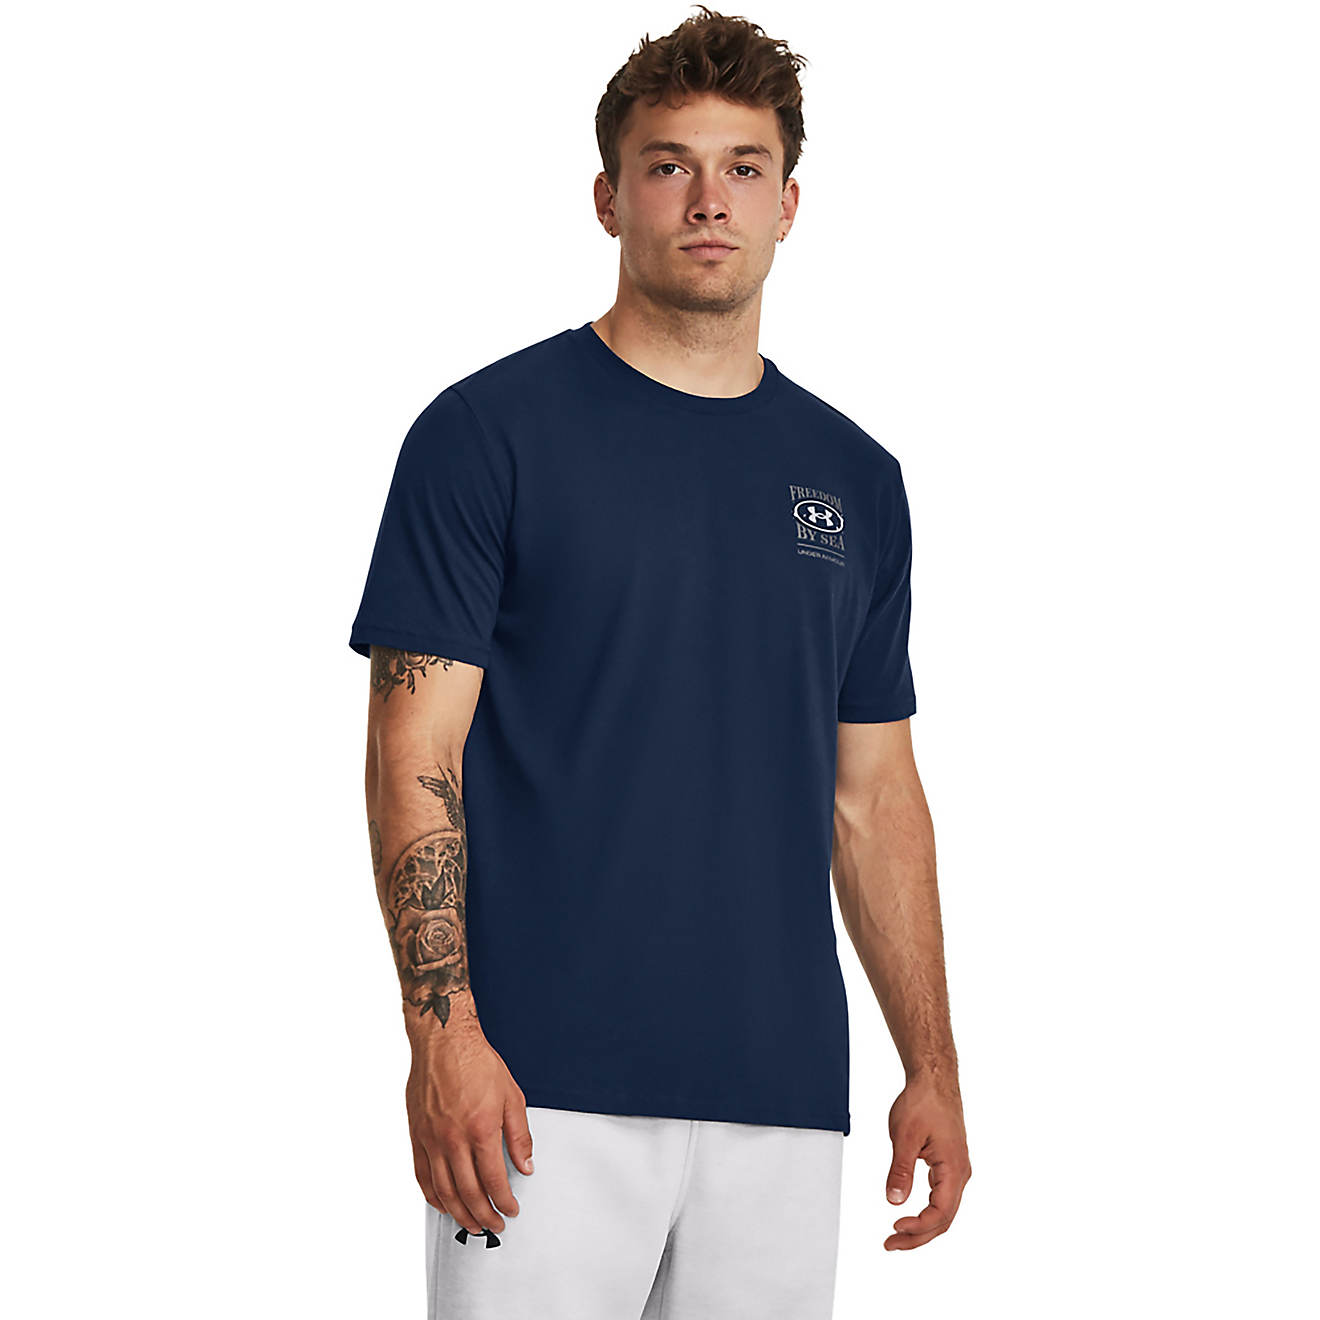 Under Armour Men's Freedom By Sea Short Sleeve T-shirt | Academy